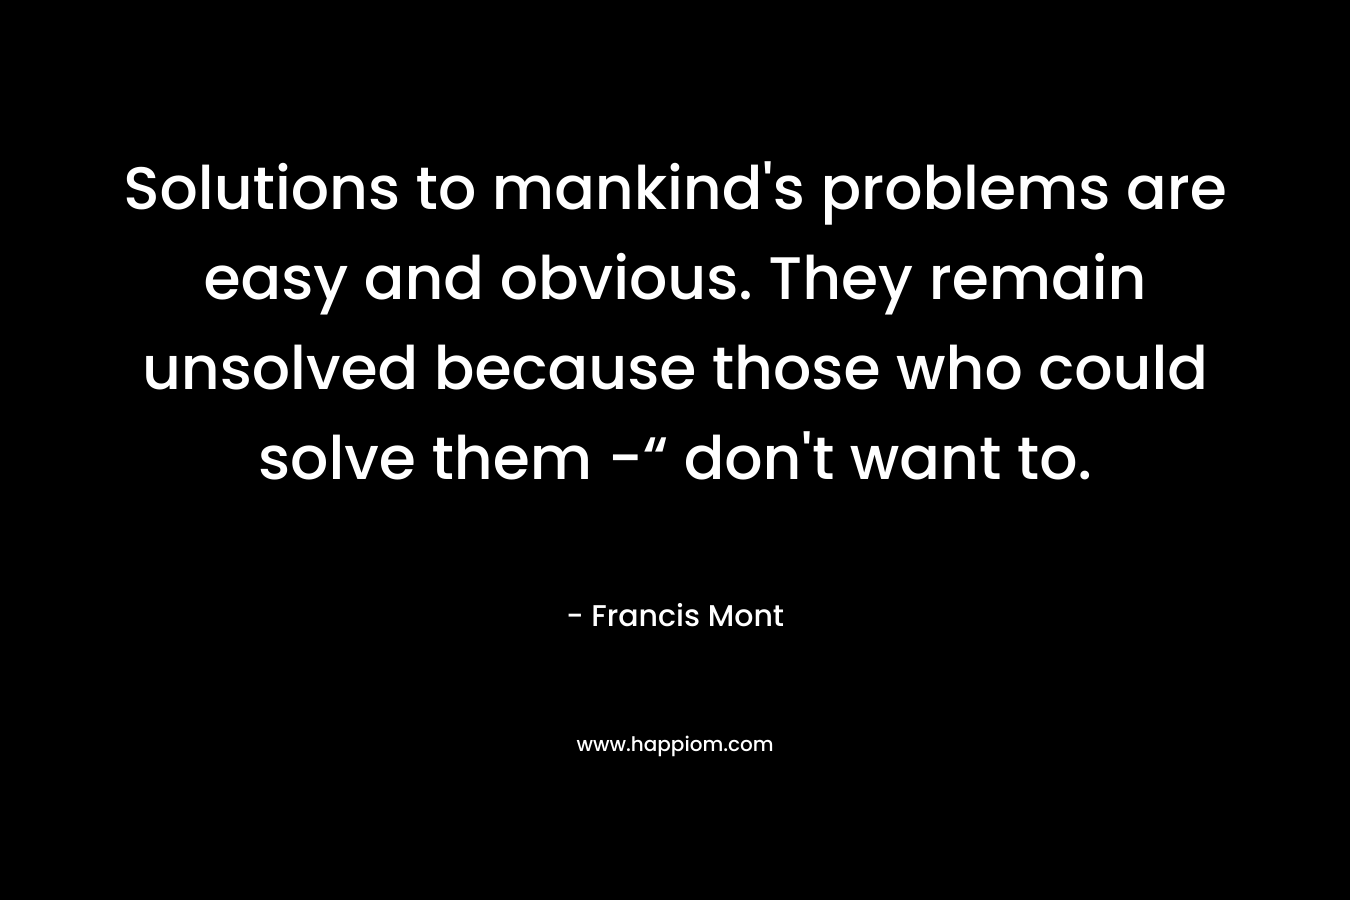 Solutions to mankind's problems are easy and obvious. They remain unsolved because those who could solve them -“ don't want to.